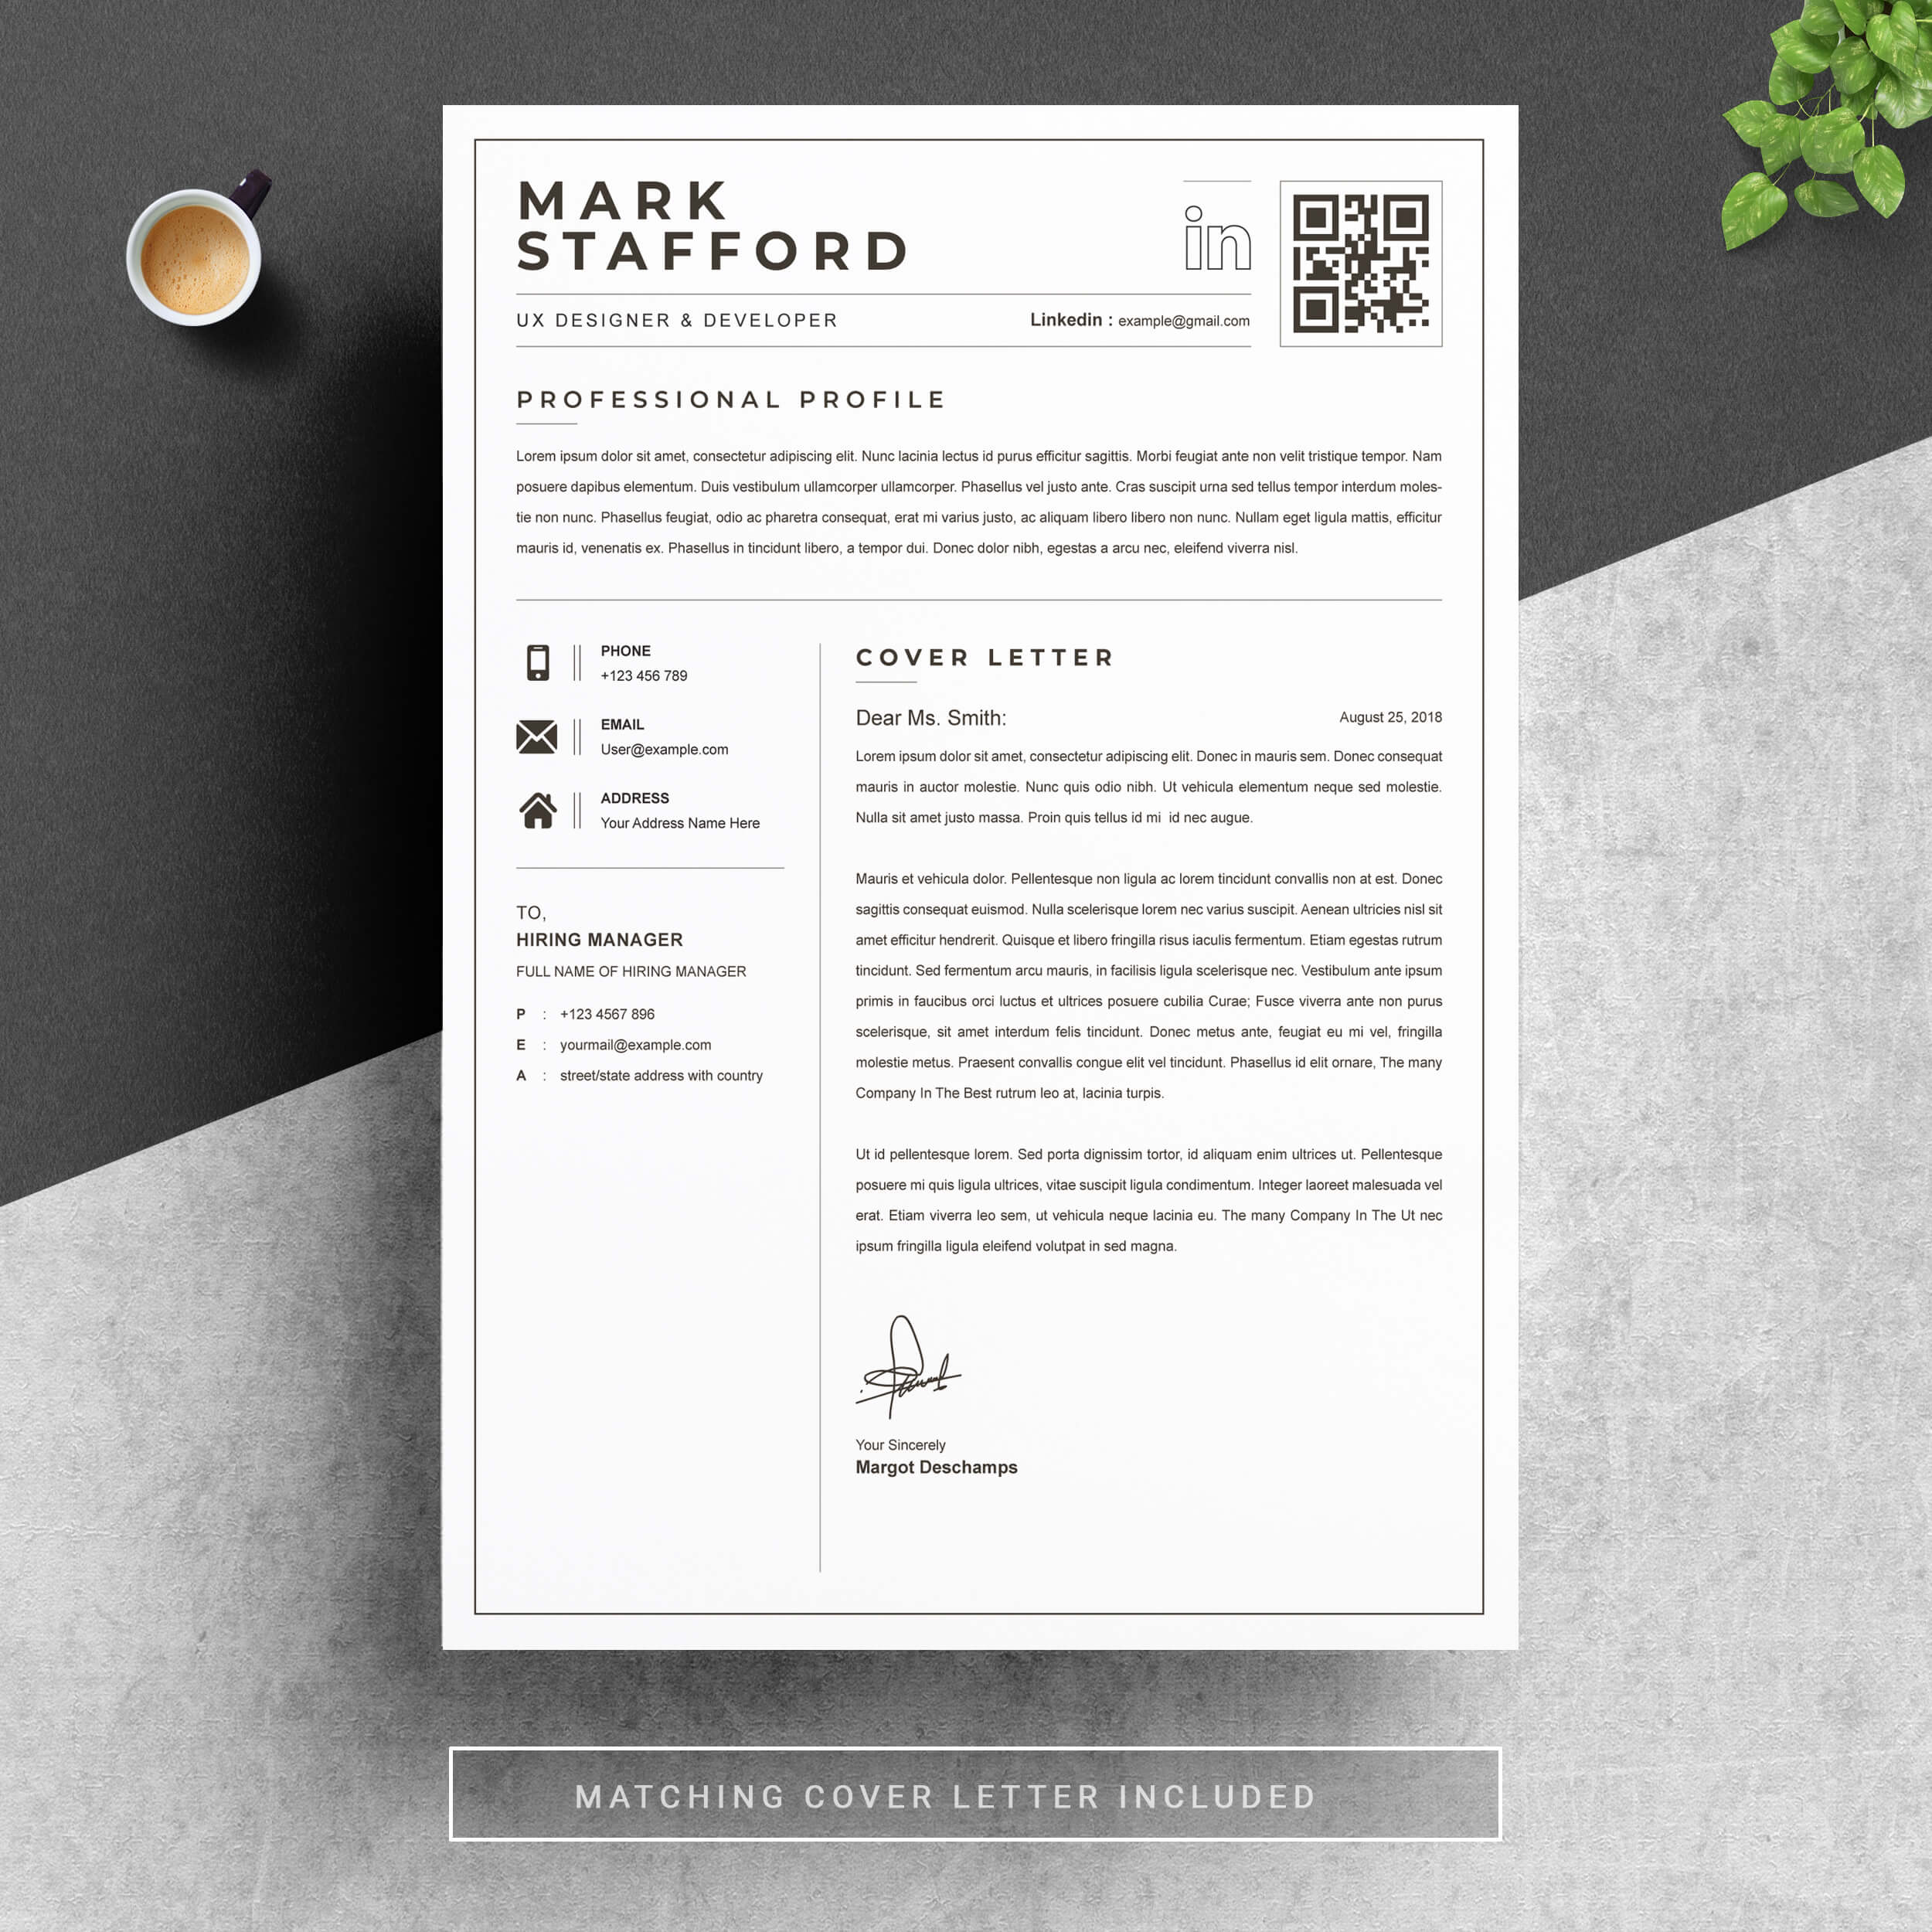 04 resume cover letter page free resume design template 2 487